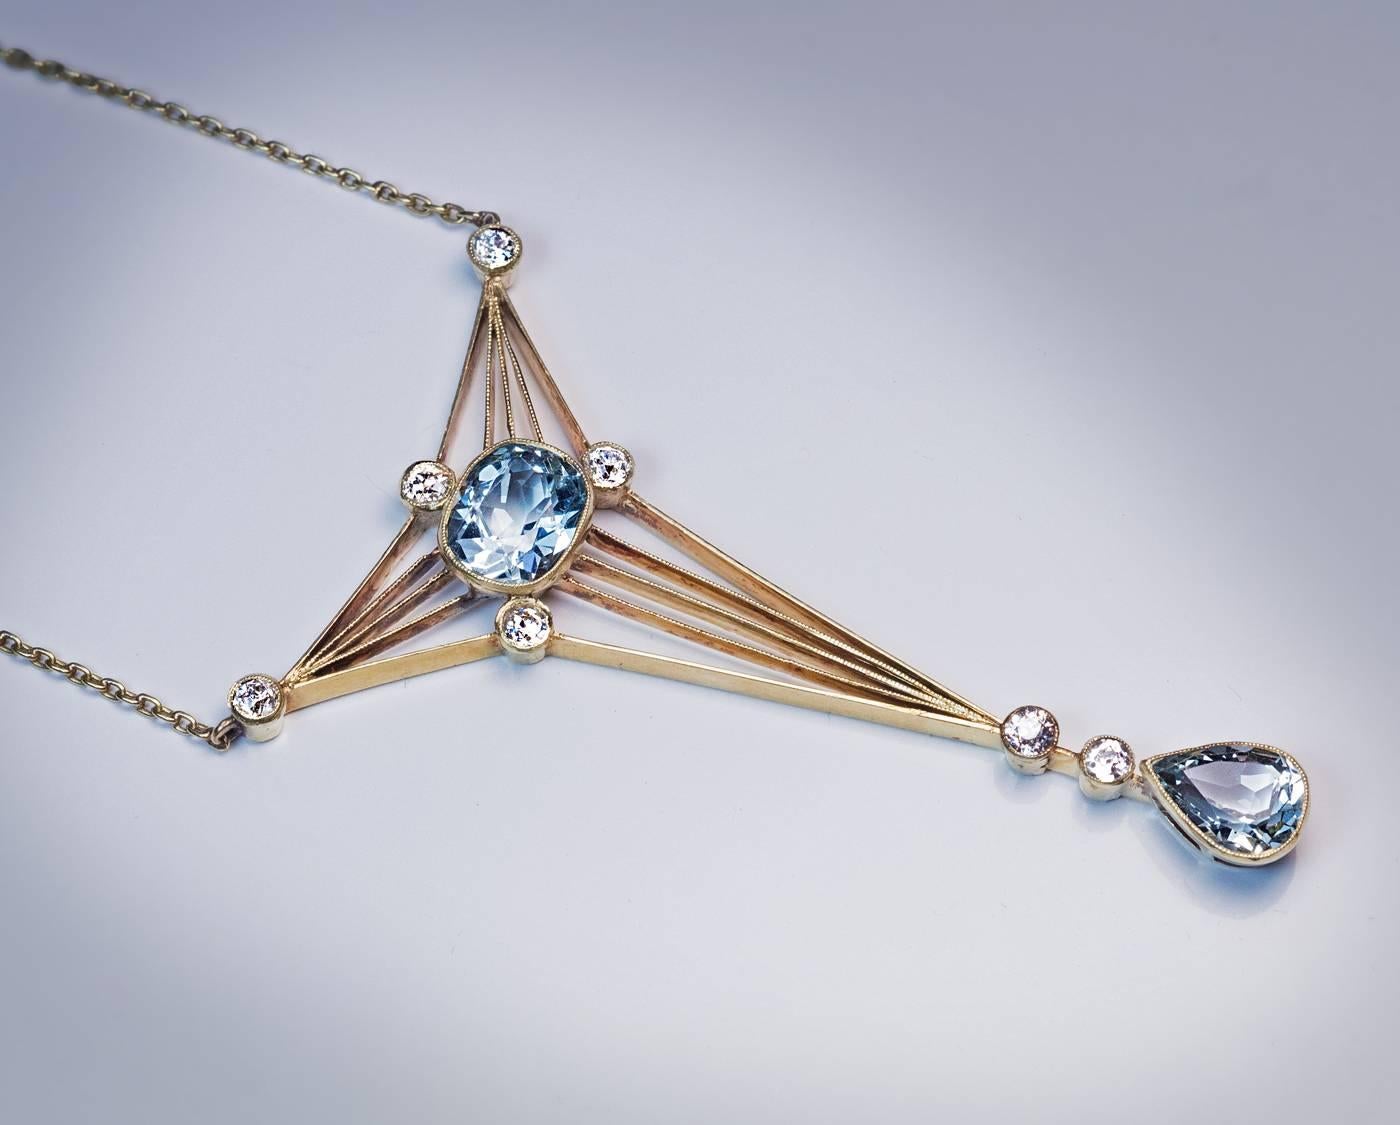 This elegant early Art Deco pendant necklace was made in Moscow between 1908 and 1917.

The 14K greenish-yellow gold pendant is bezel-set with one cushion cut aquamarine, one drop shaped aquamarine and seven old European cut diamonds.

Estimated